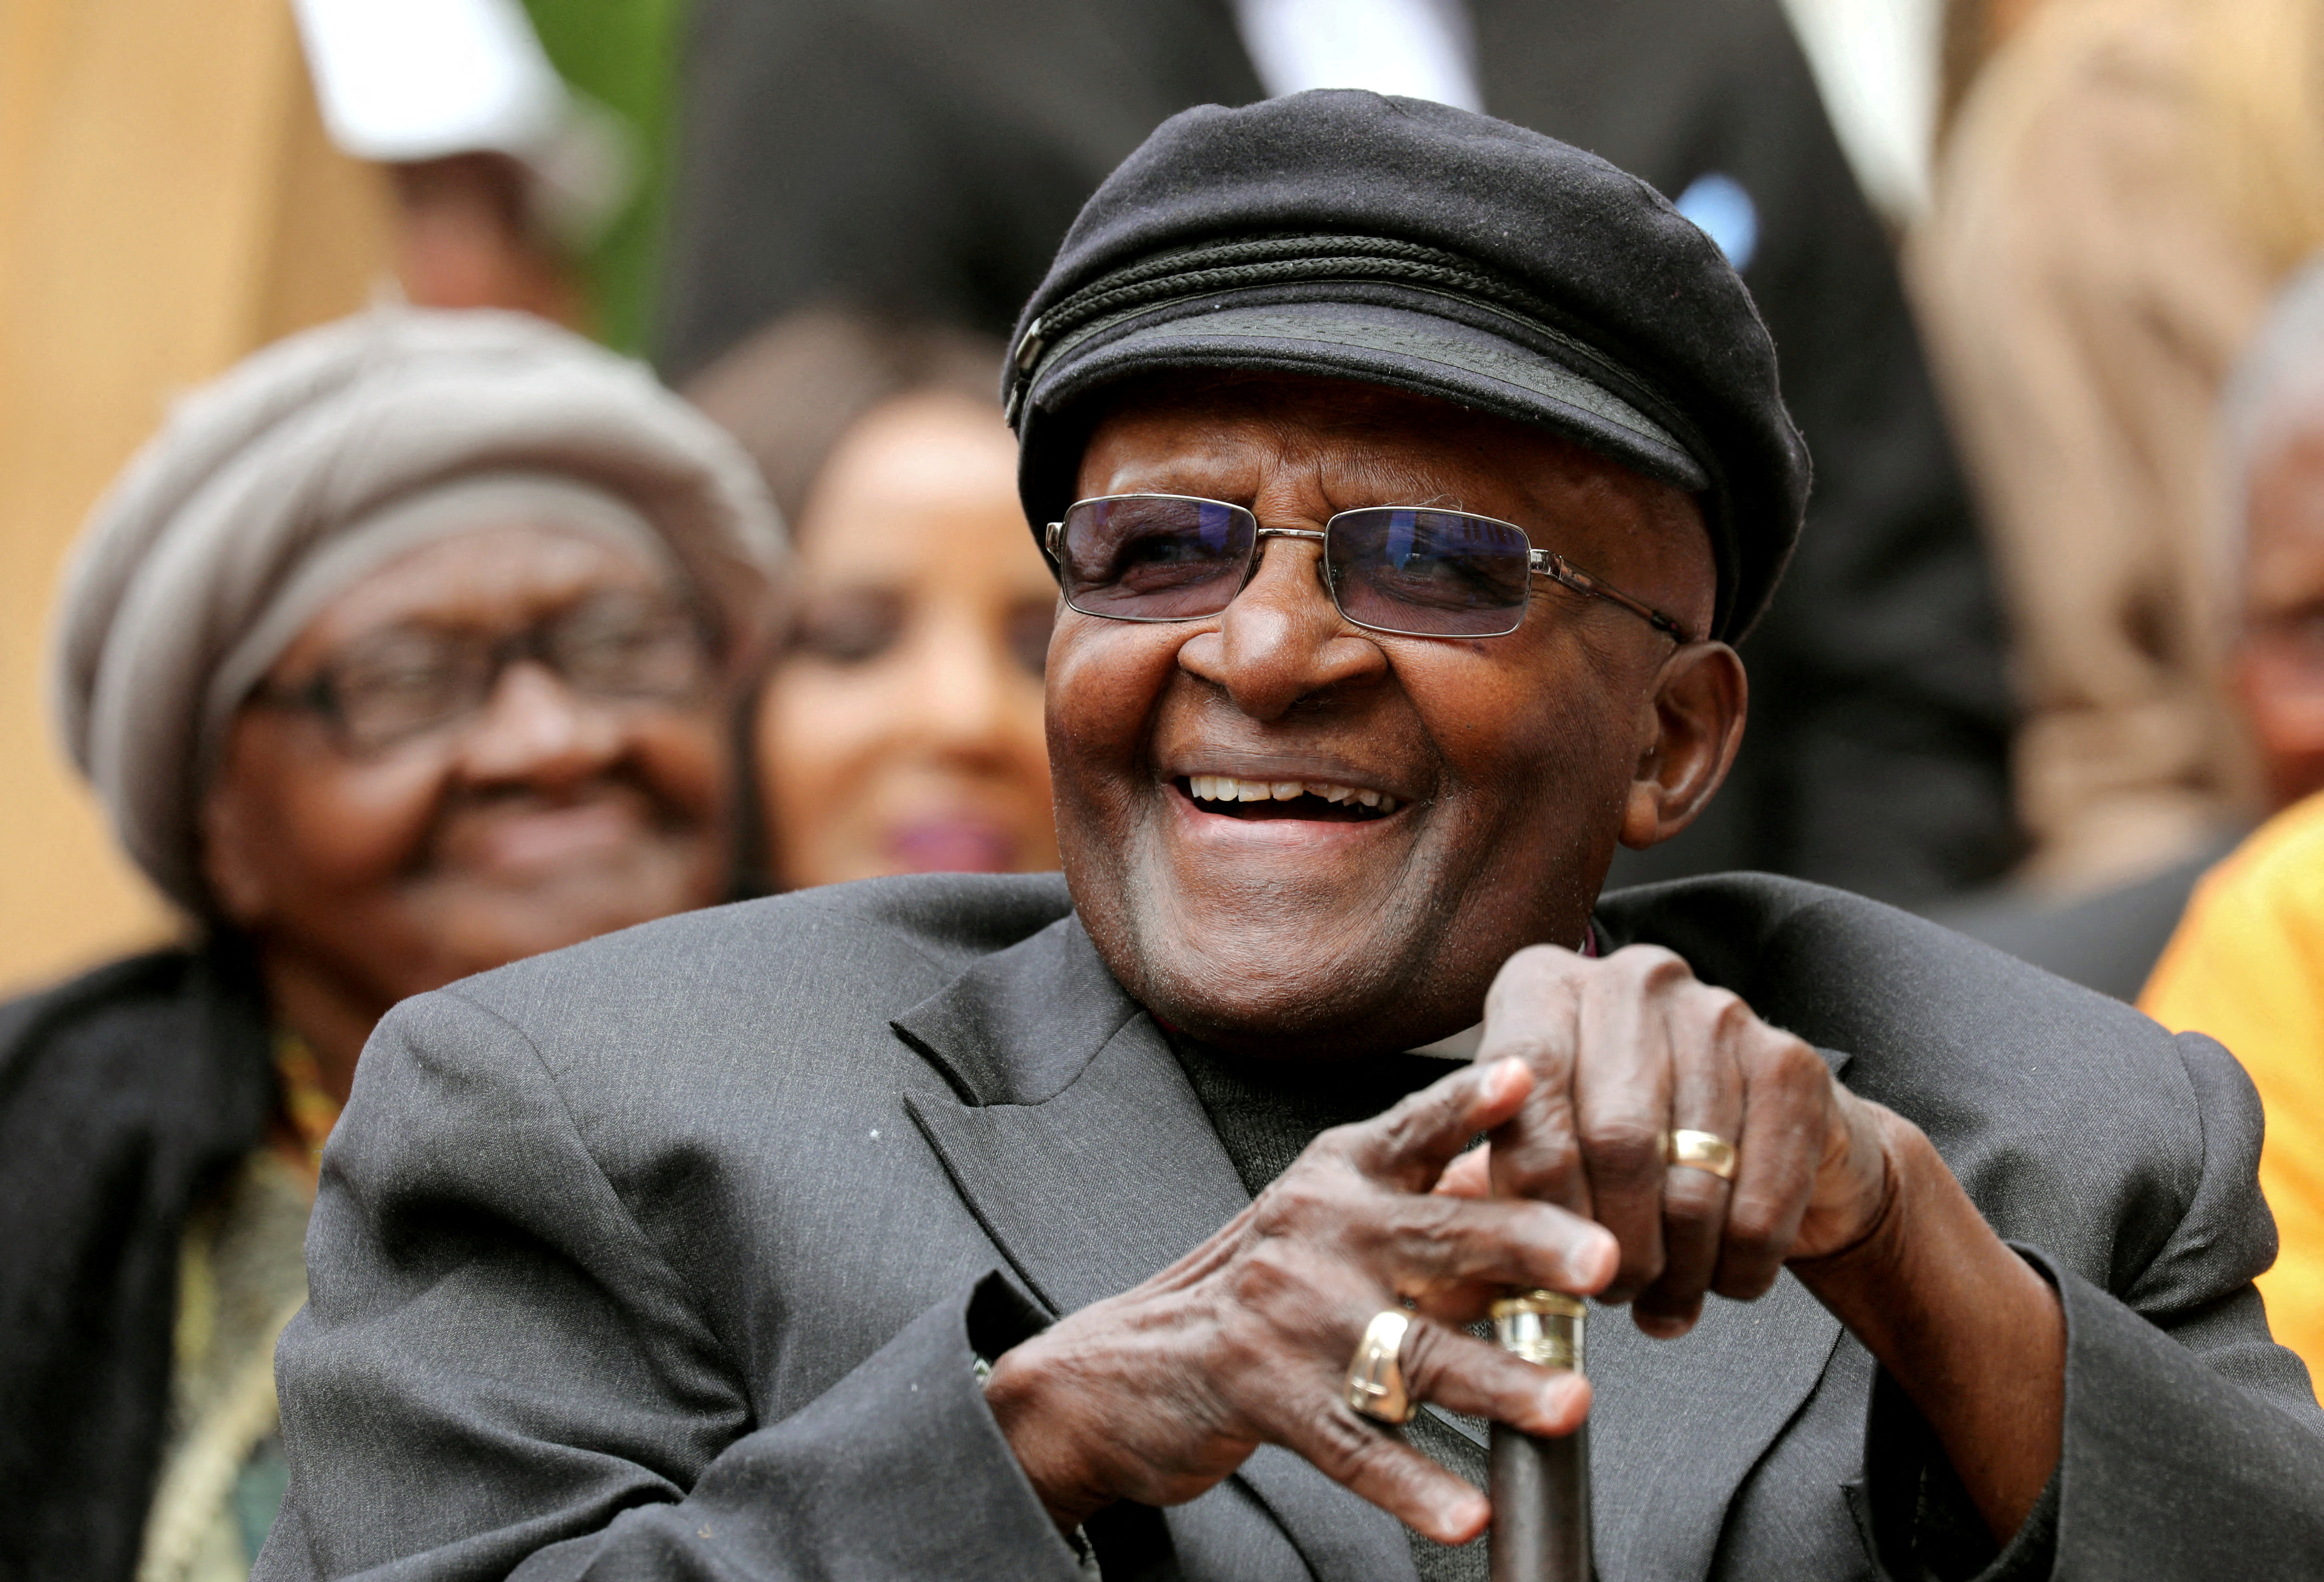 Archbishop Desmond Tutu laughs as crowds gather to celebrate his birthday by unveiling an arch in his honour outside St George's Cathedral in Cape Town